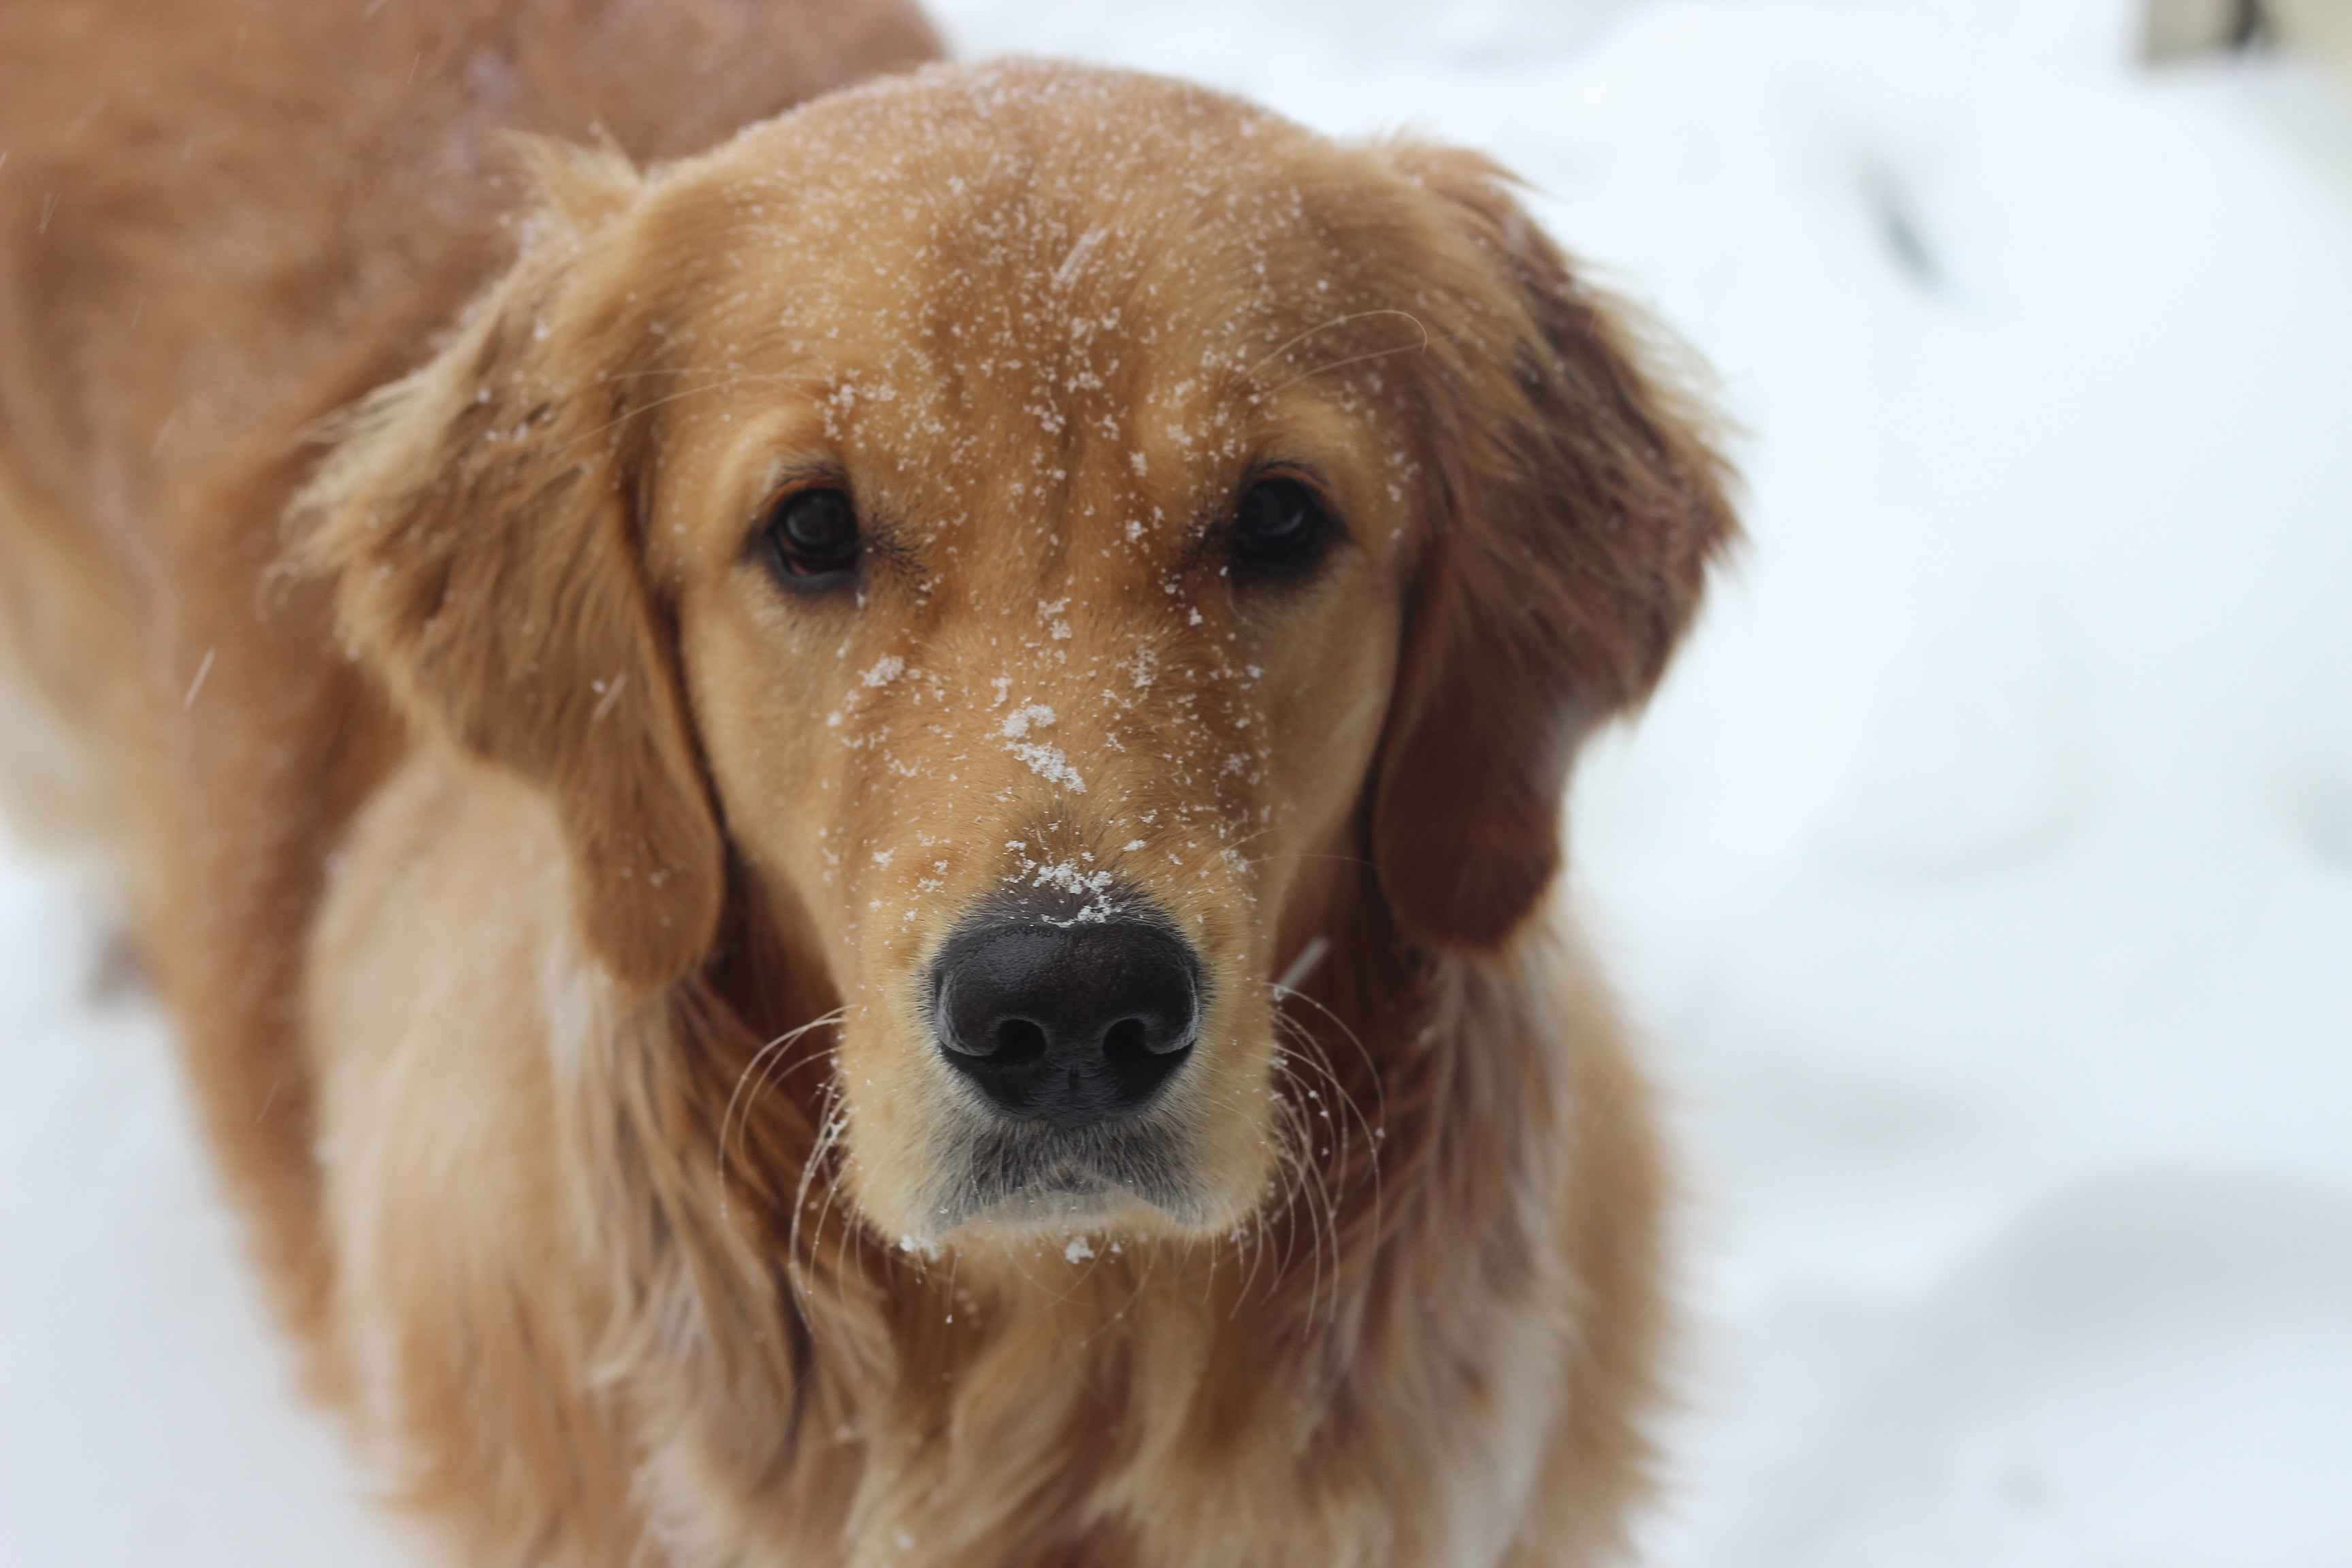 What are some signs of respiratory problems in golden retrievers?